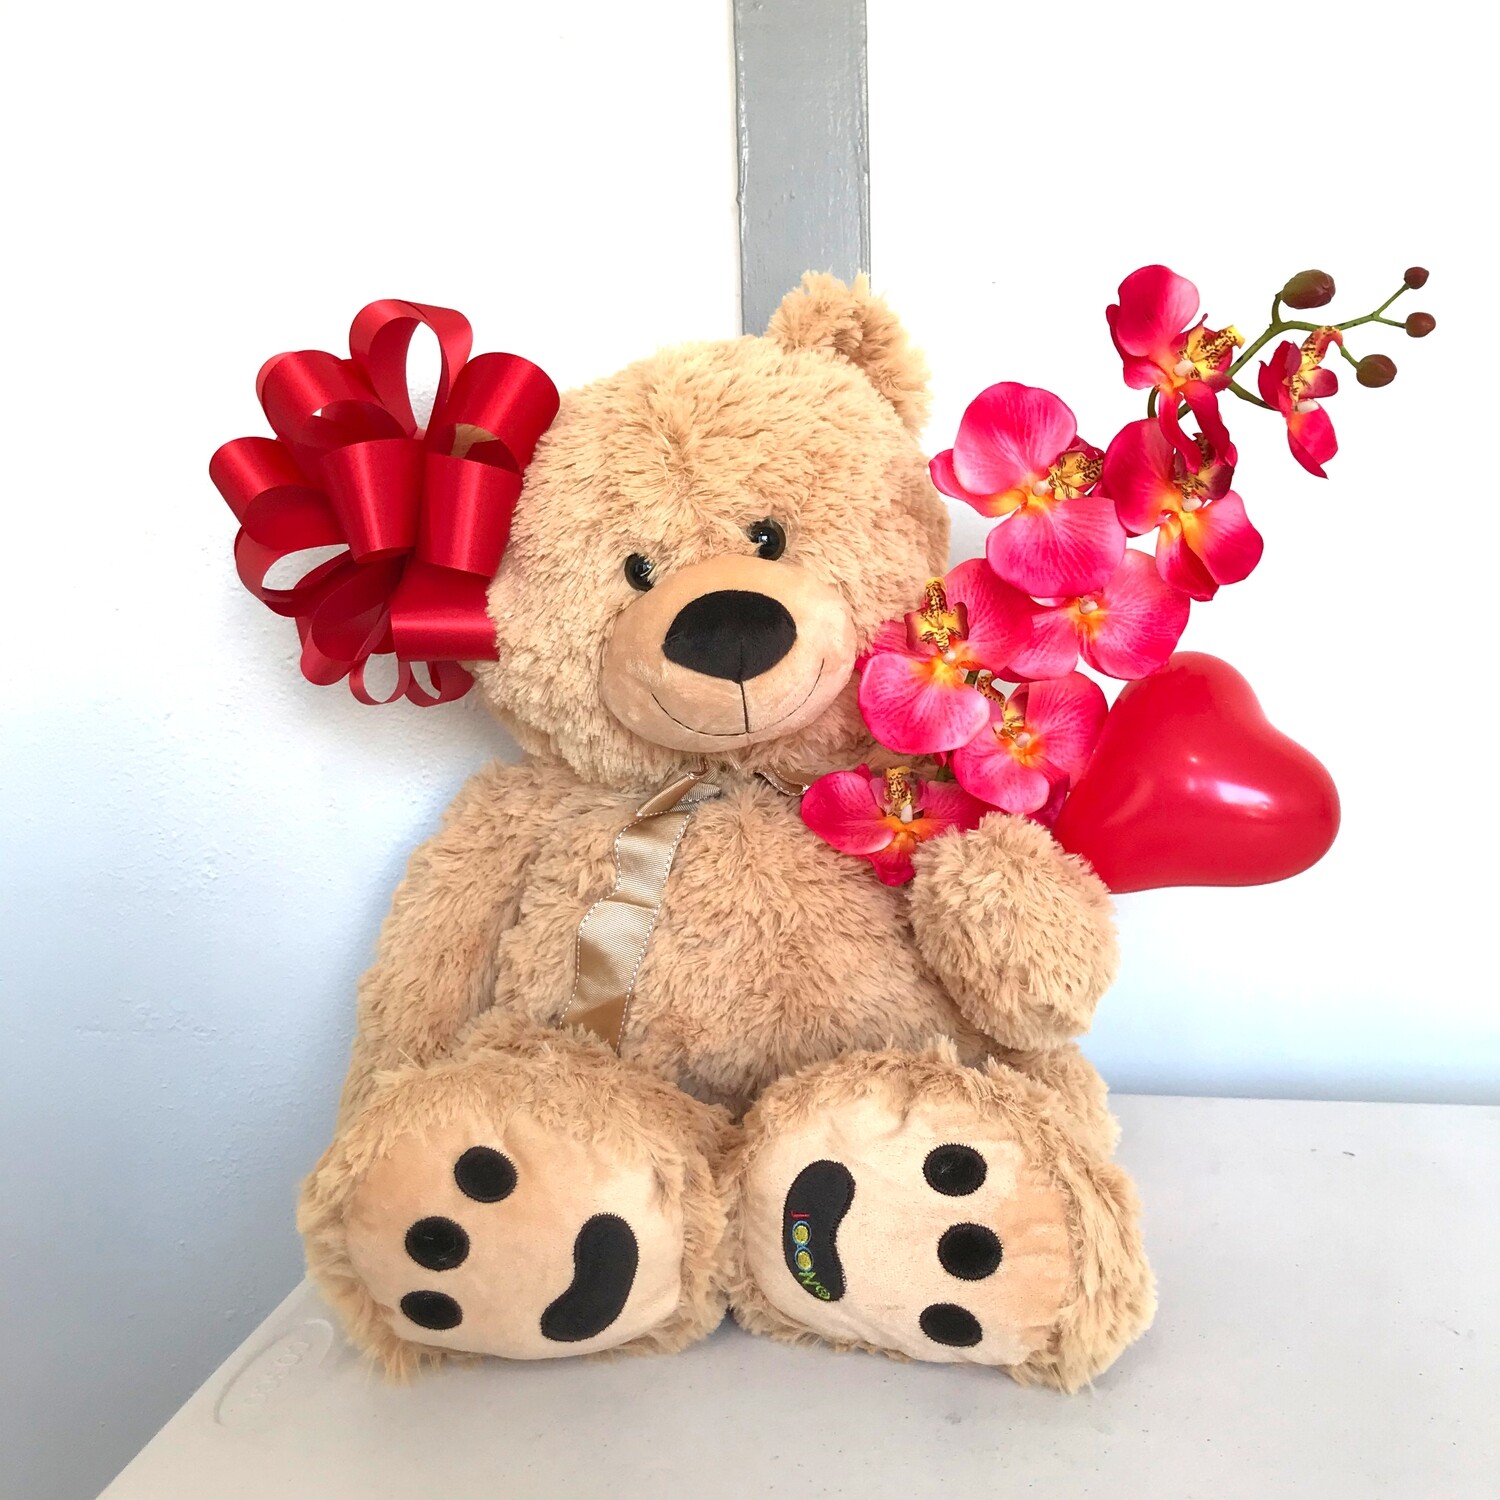 Big teddy bear with bow and orchid